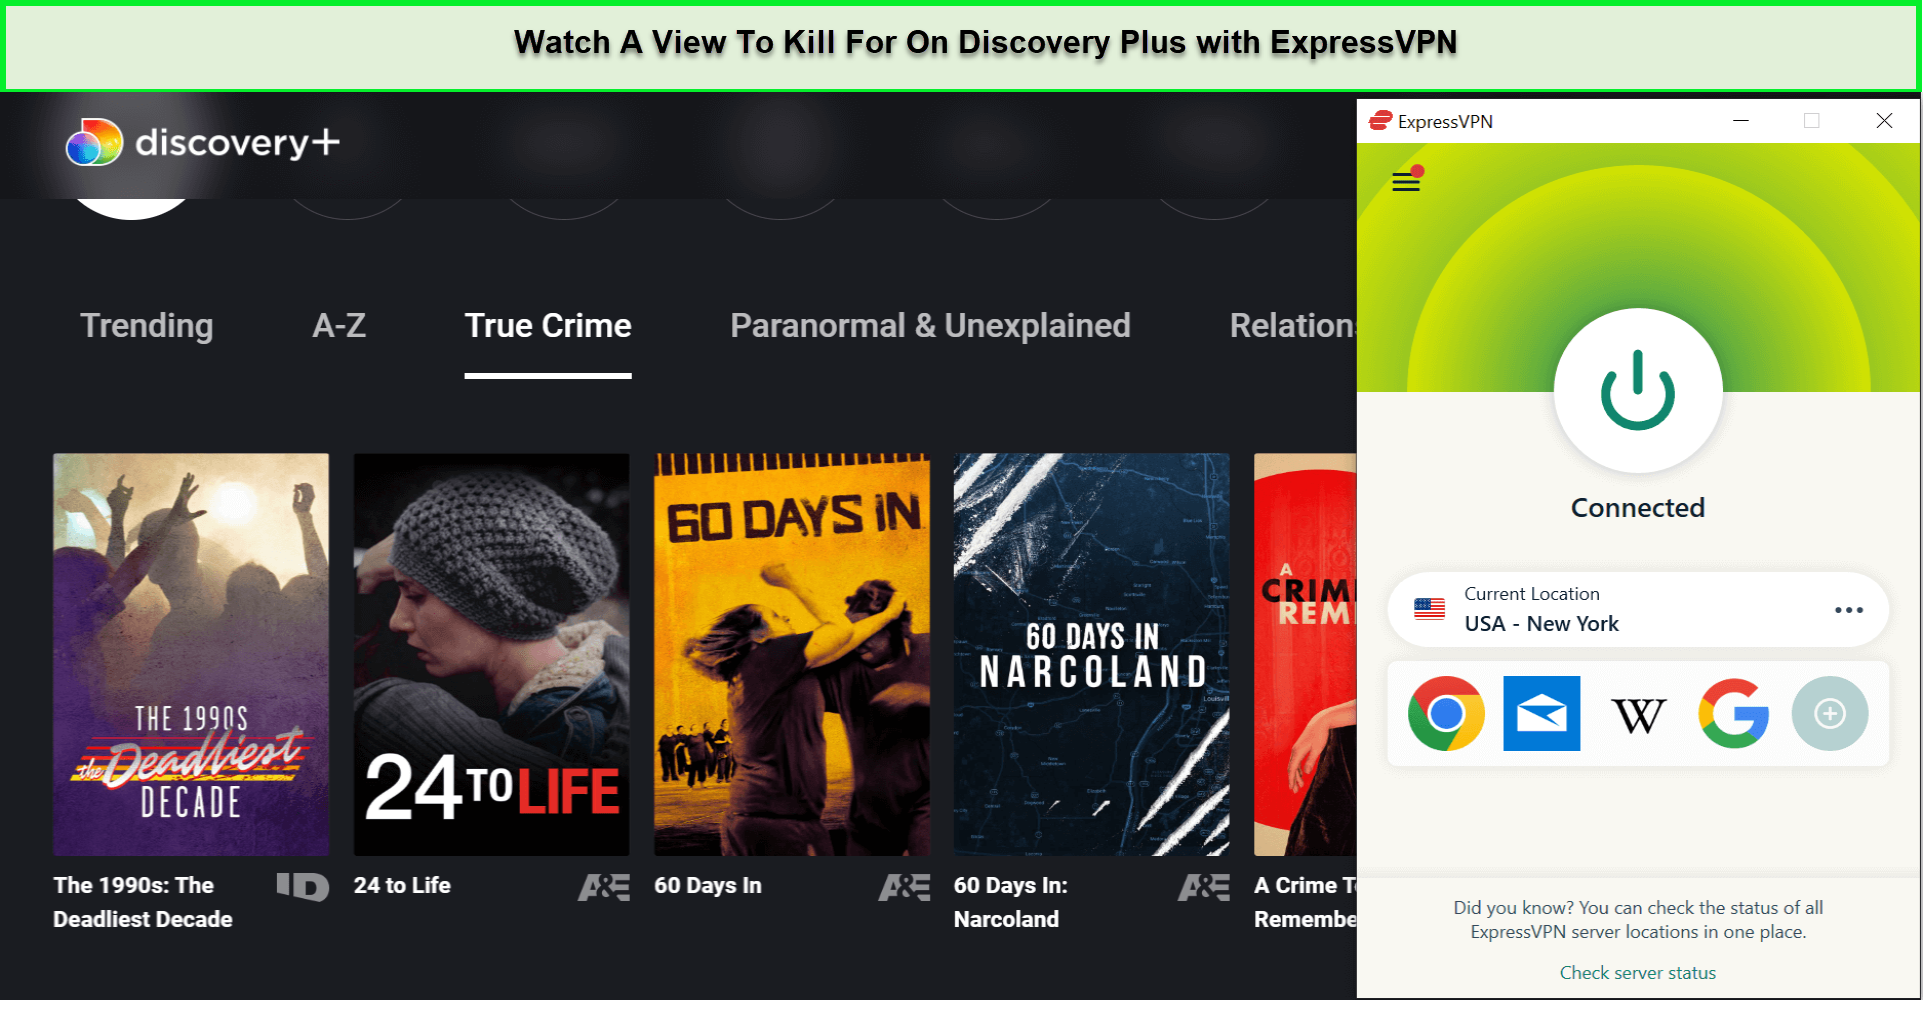 Watch-A-View-To-Kill-For-outside-USA-On-Discovery-Plus-with-ExpressVPN